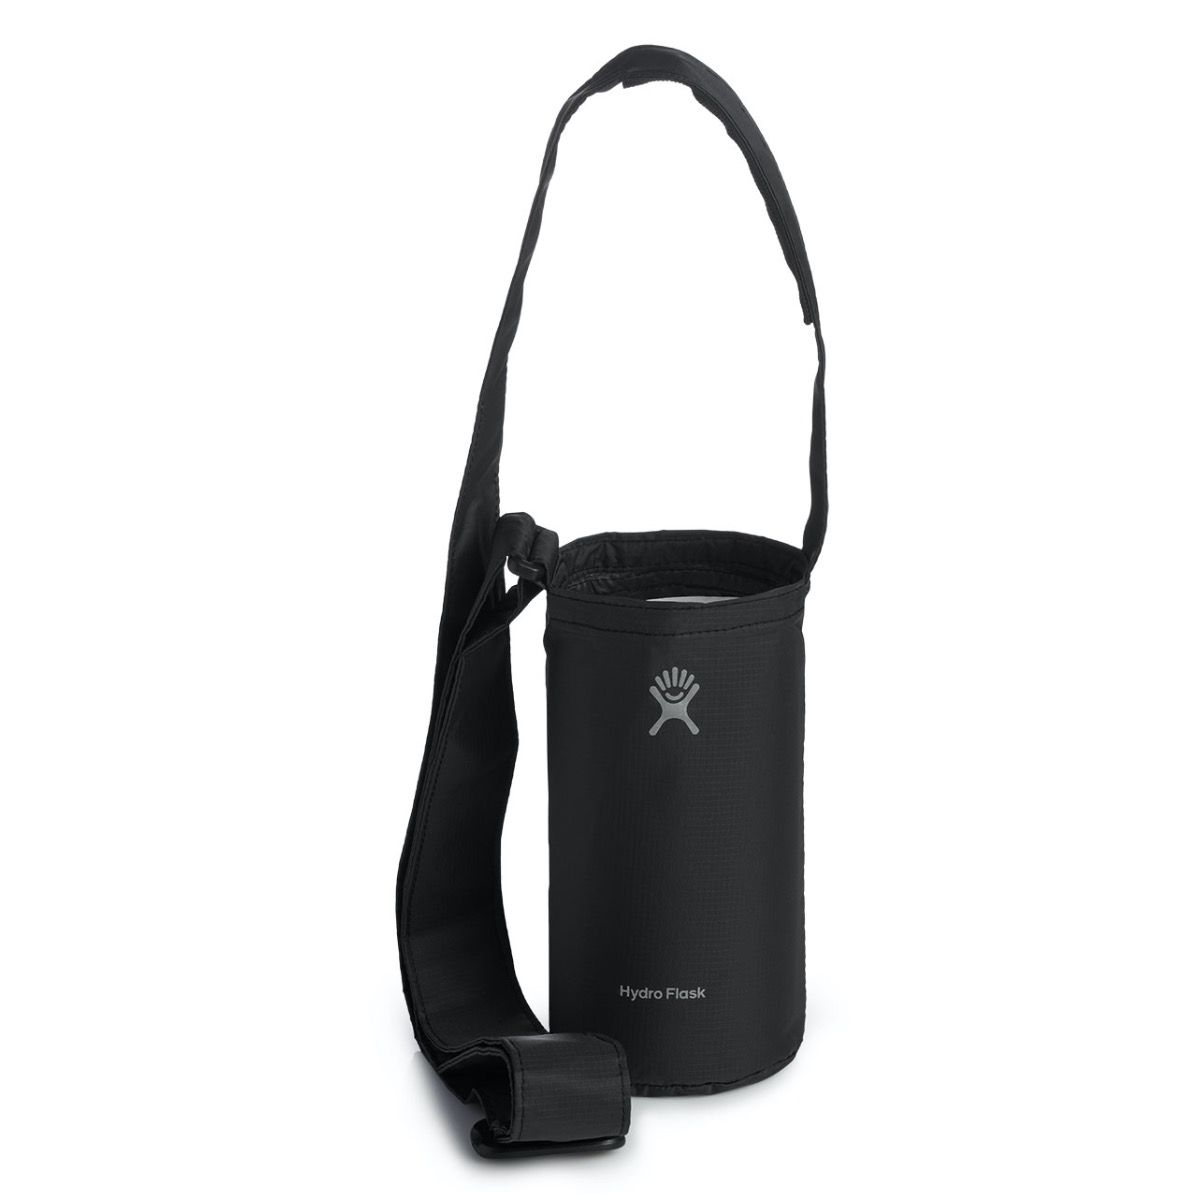 Hydro Flask Bottle Sling, Small Packable, Black